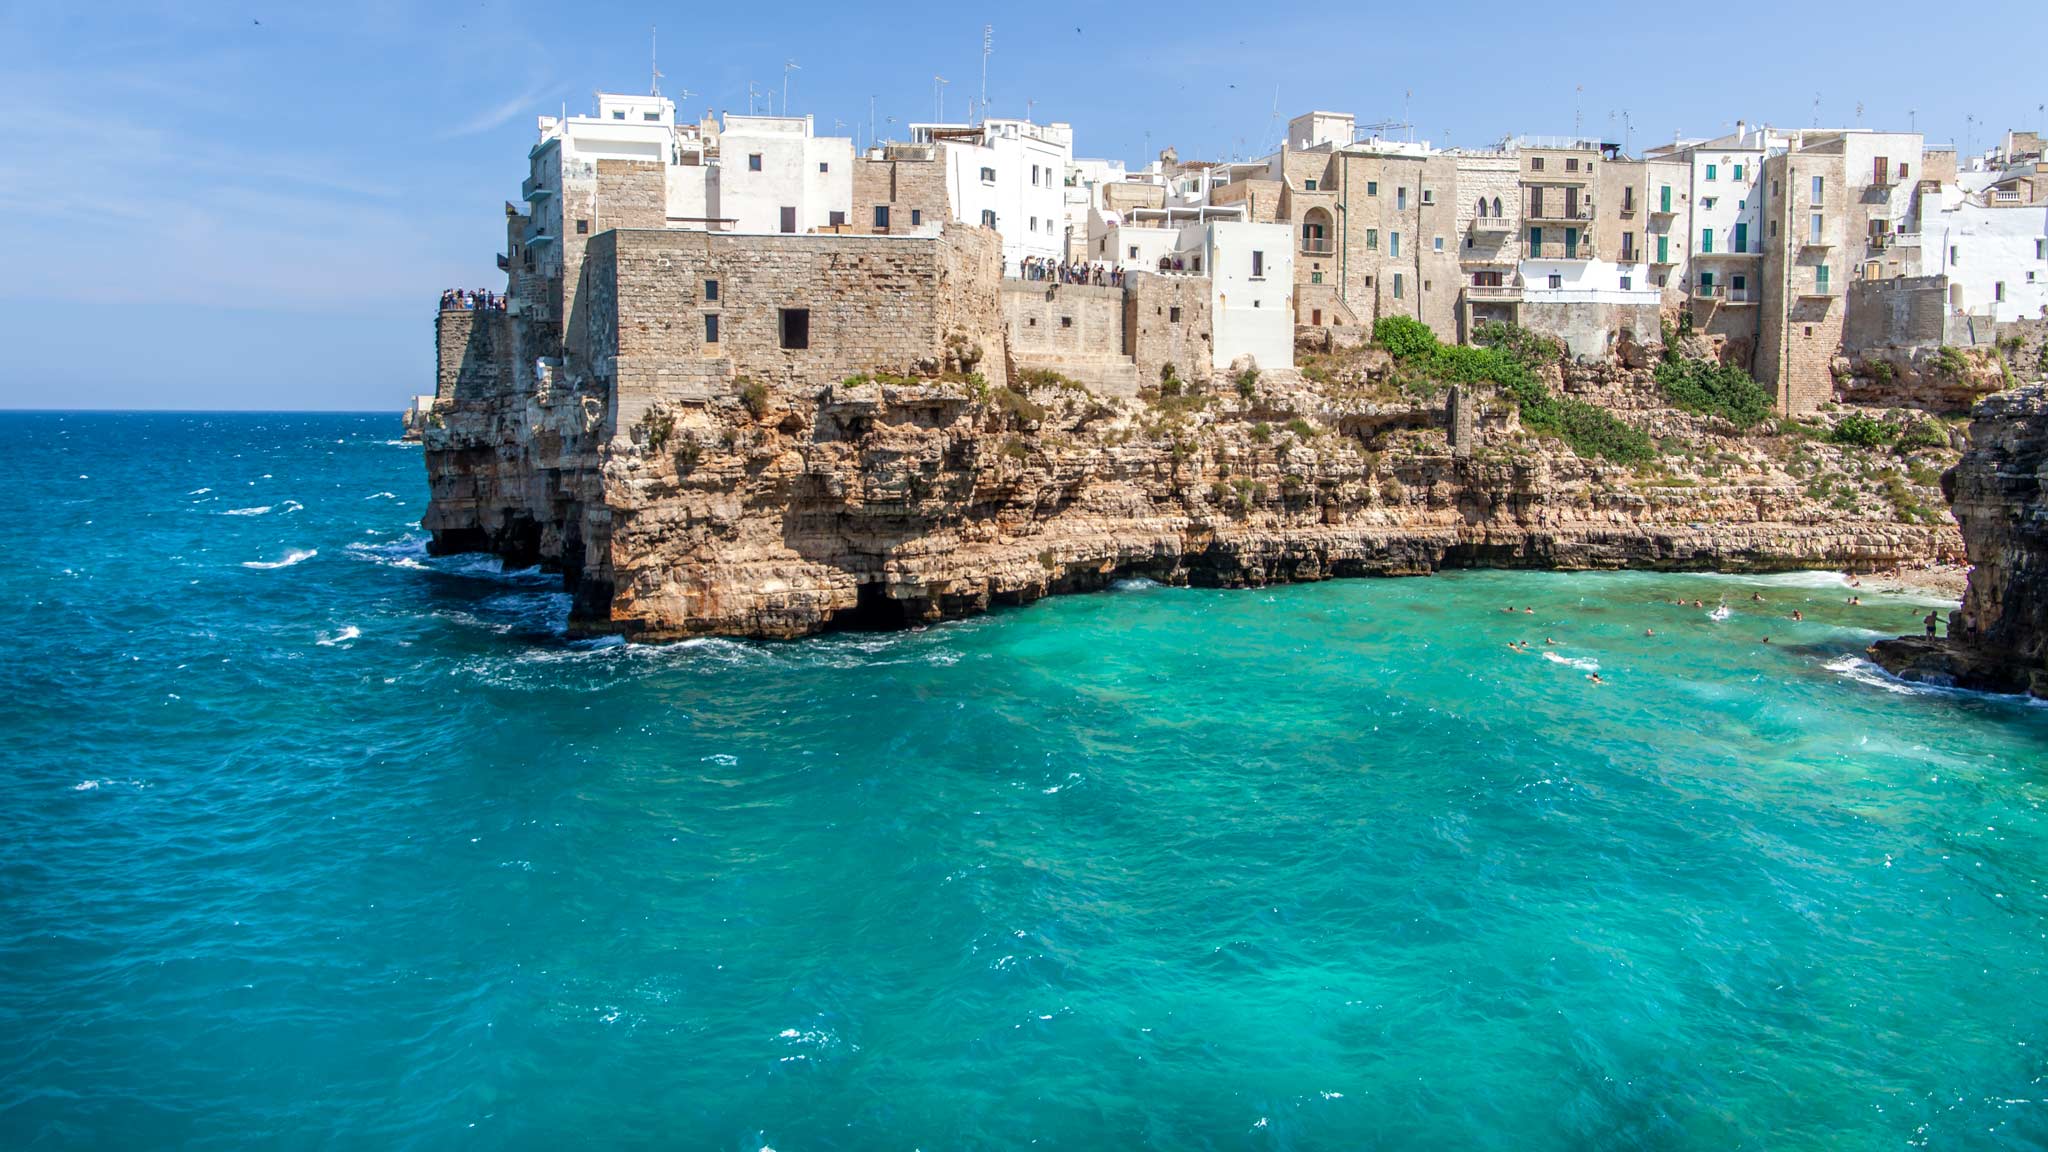 The white-washed cliff buildings stick out over the blue ocean of Polignano a Mare